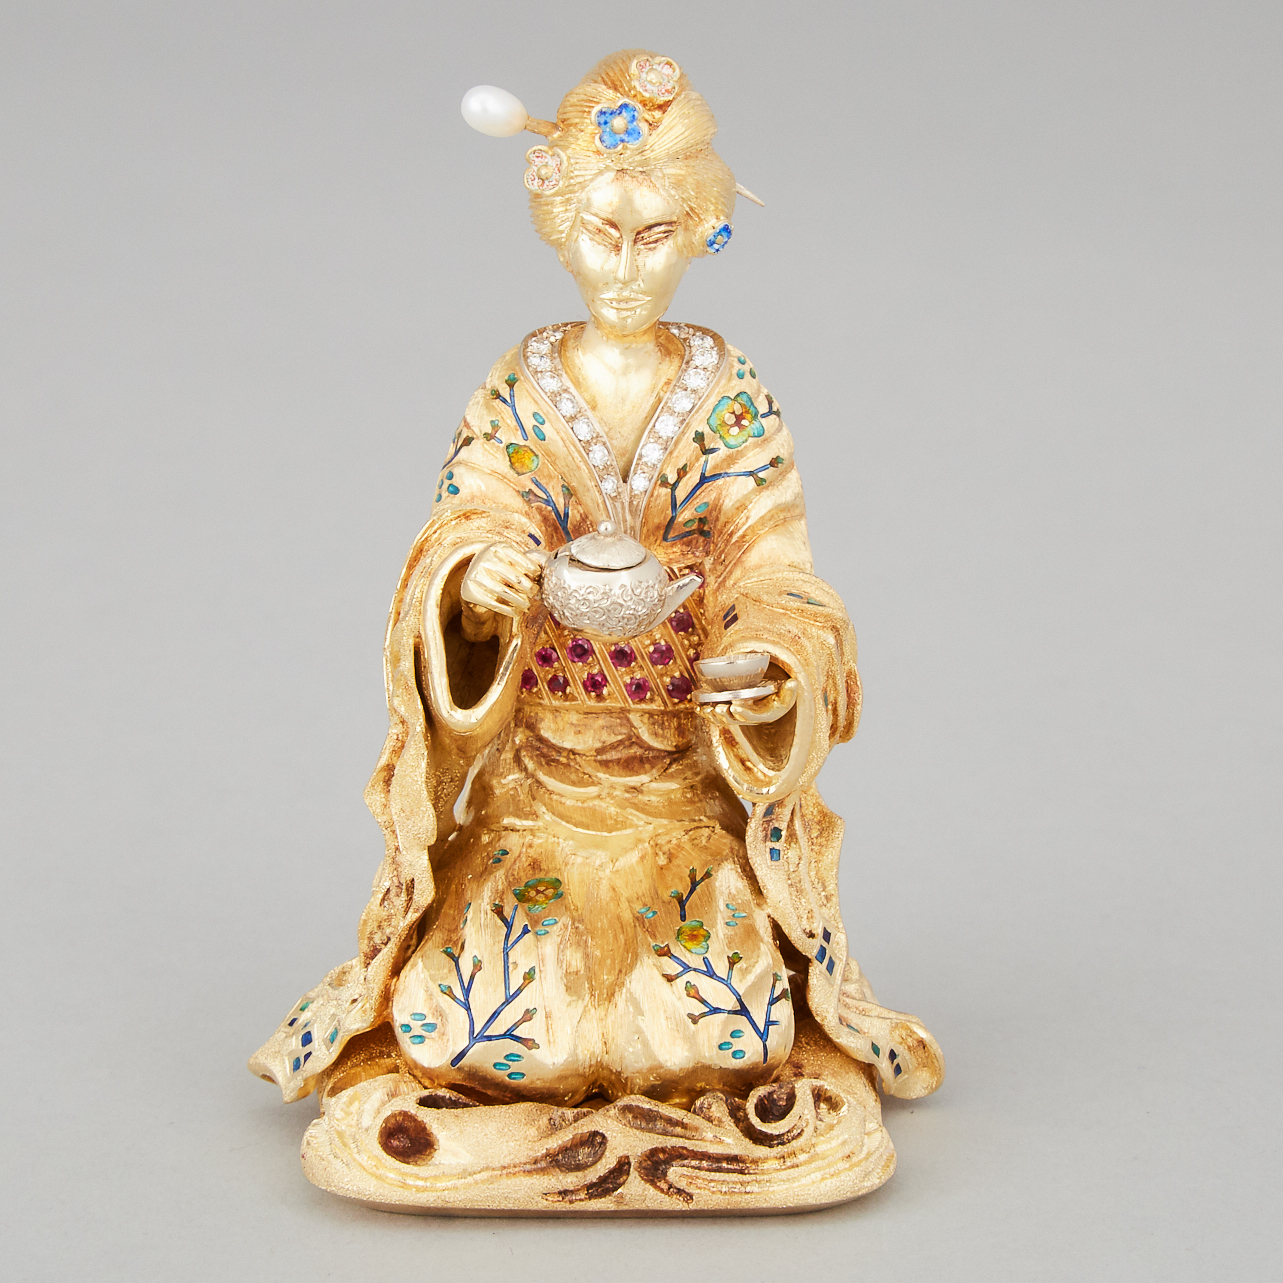 Eastern Gem-Set and Enameled Yellow and White Gold Figure of a Geisha, 20th century